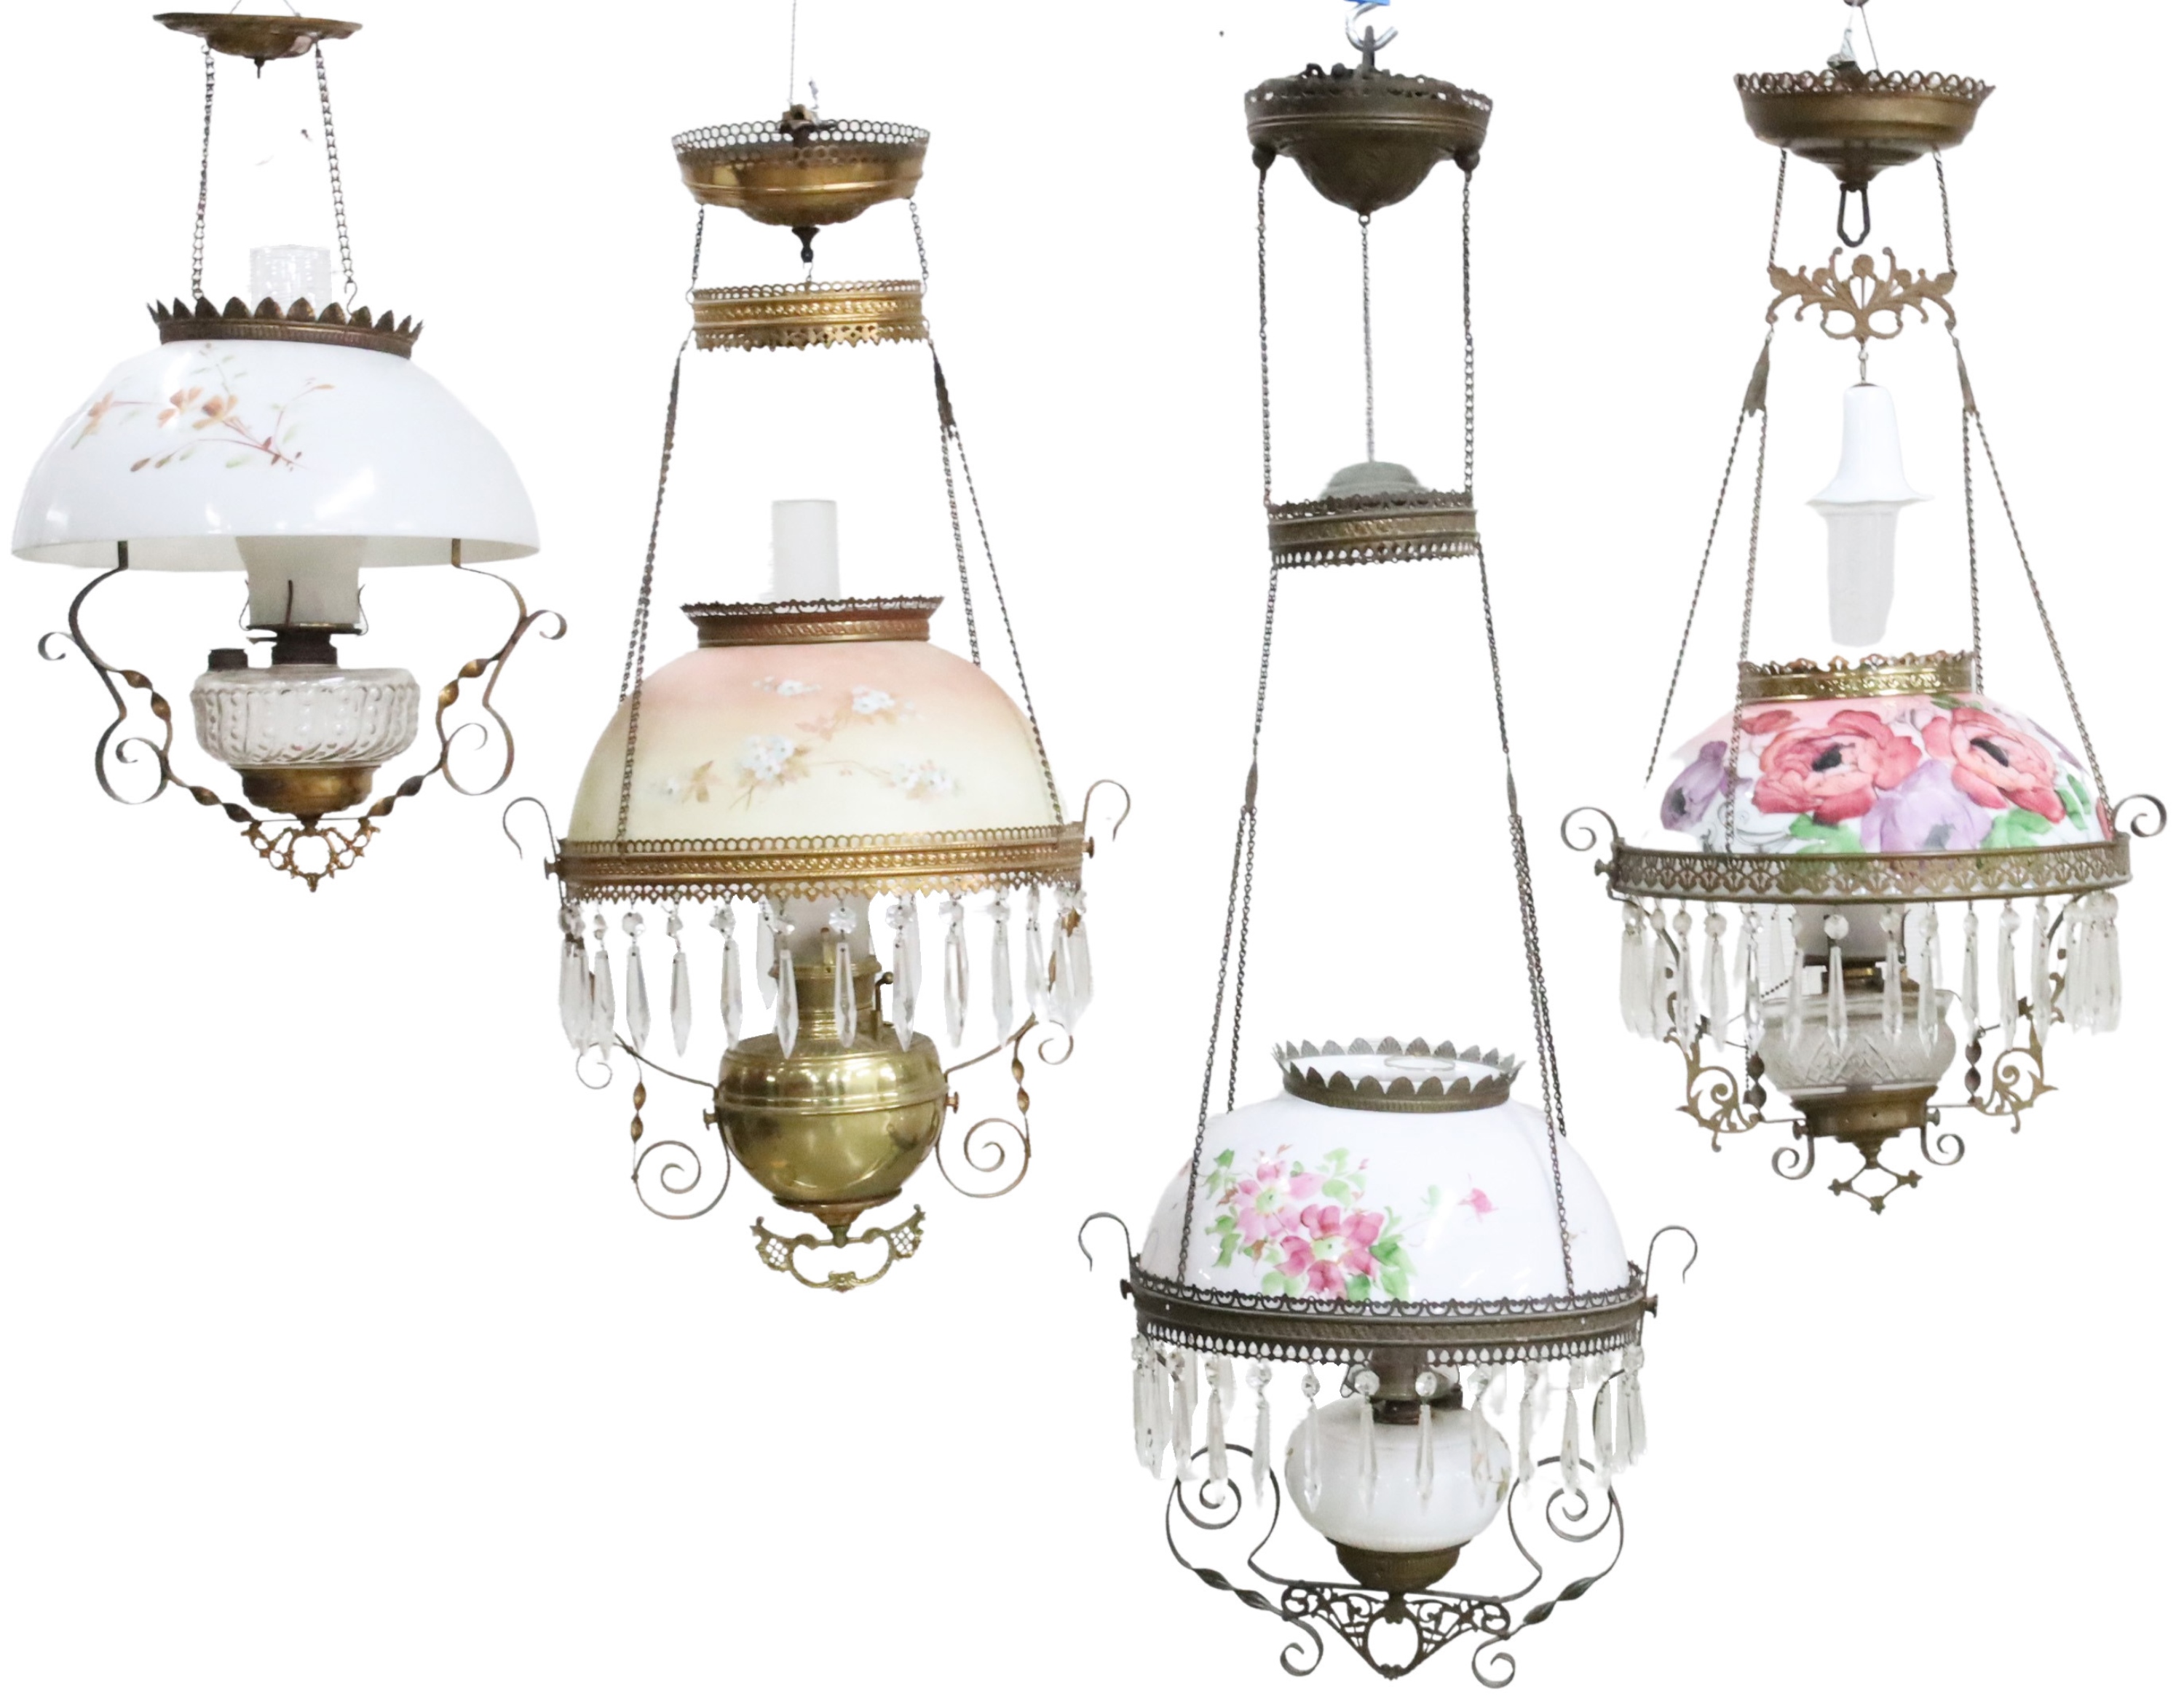 GROUP OF 4 HANGING OIL LAMPS Group 2f8c0f